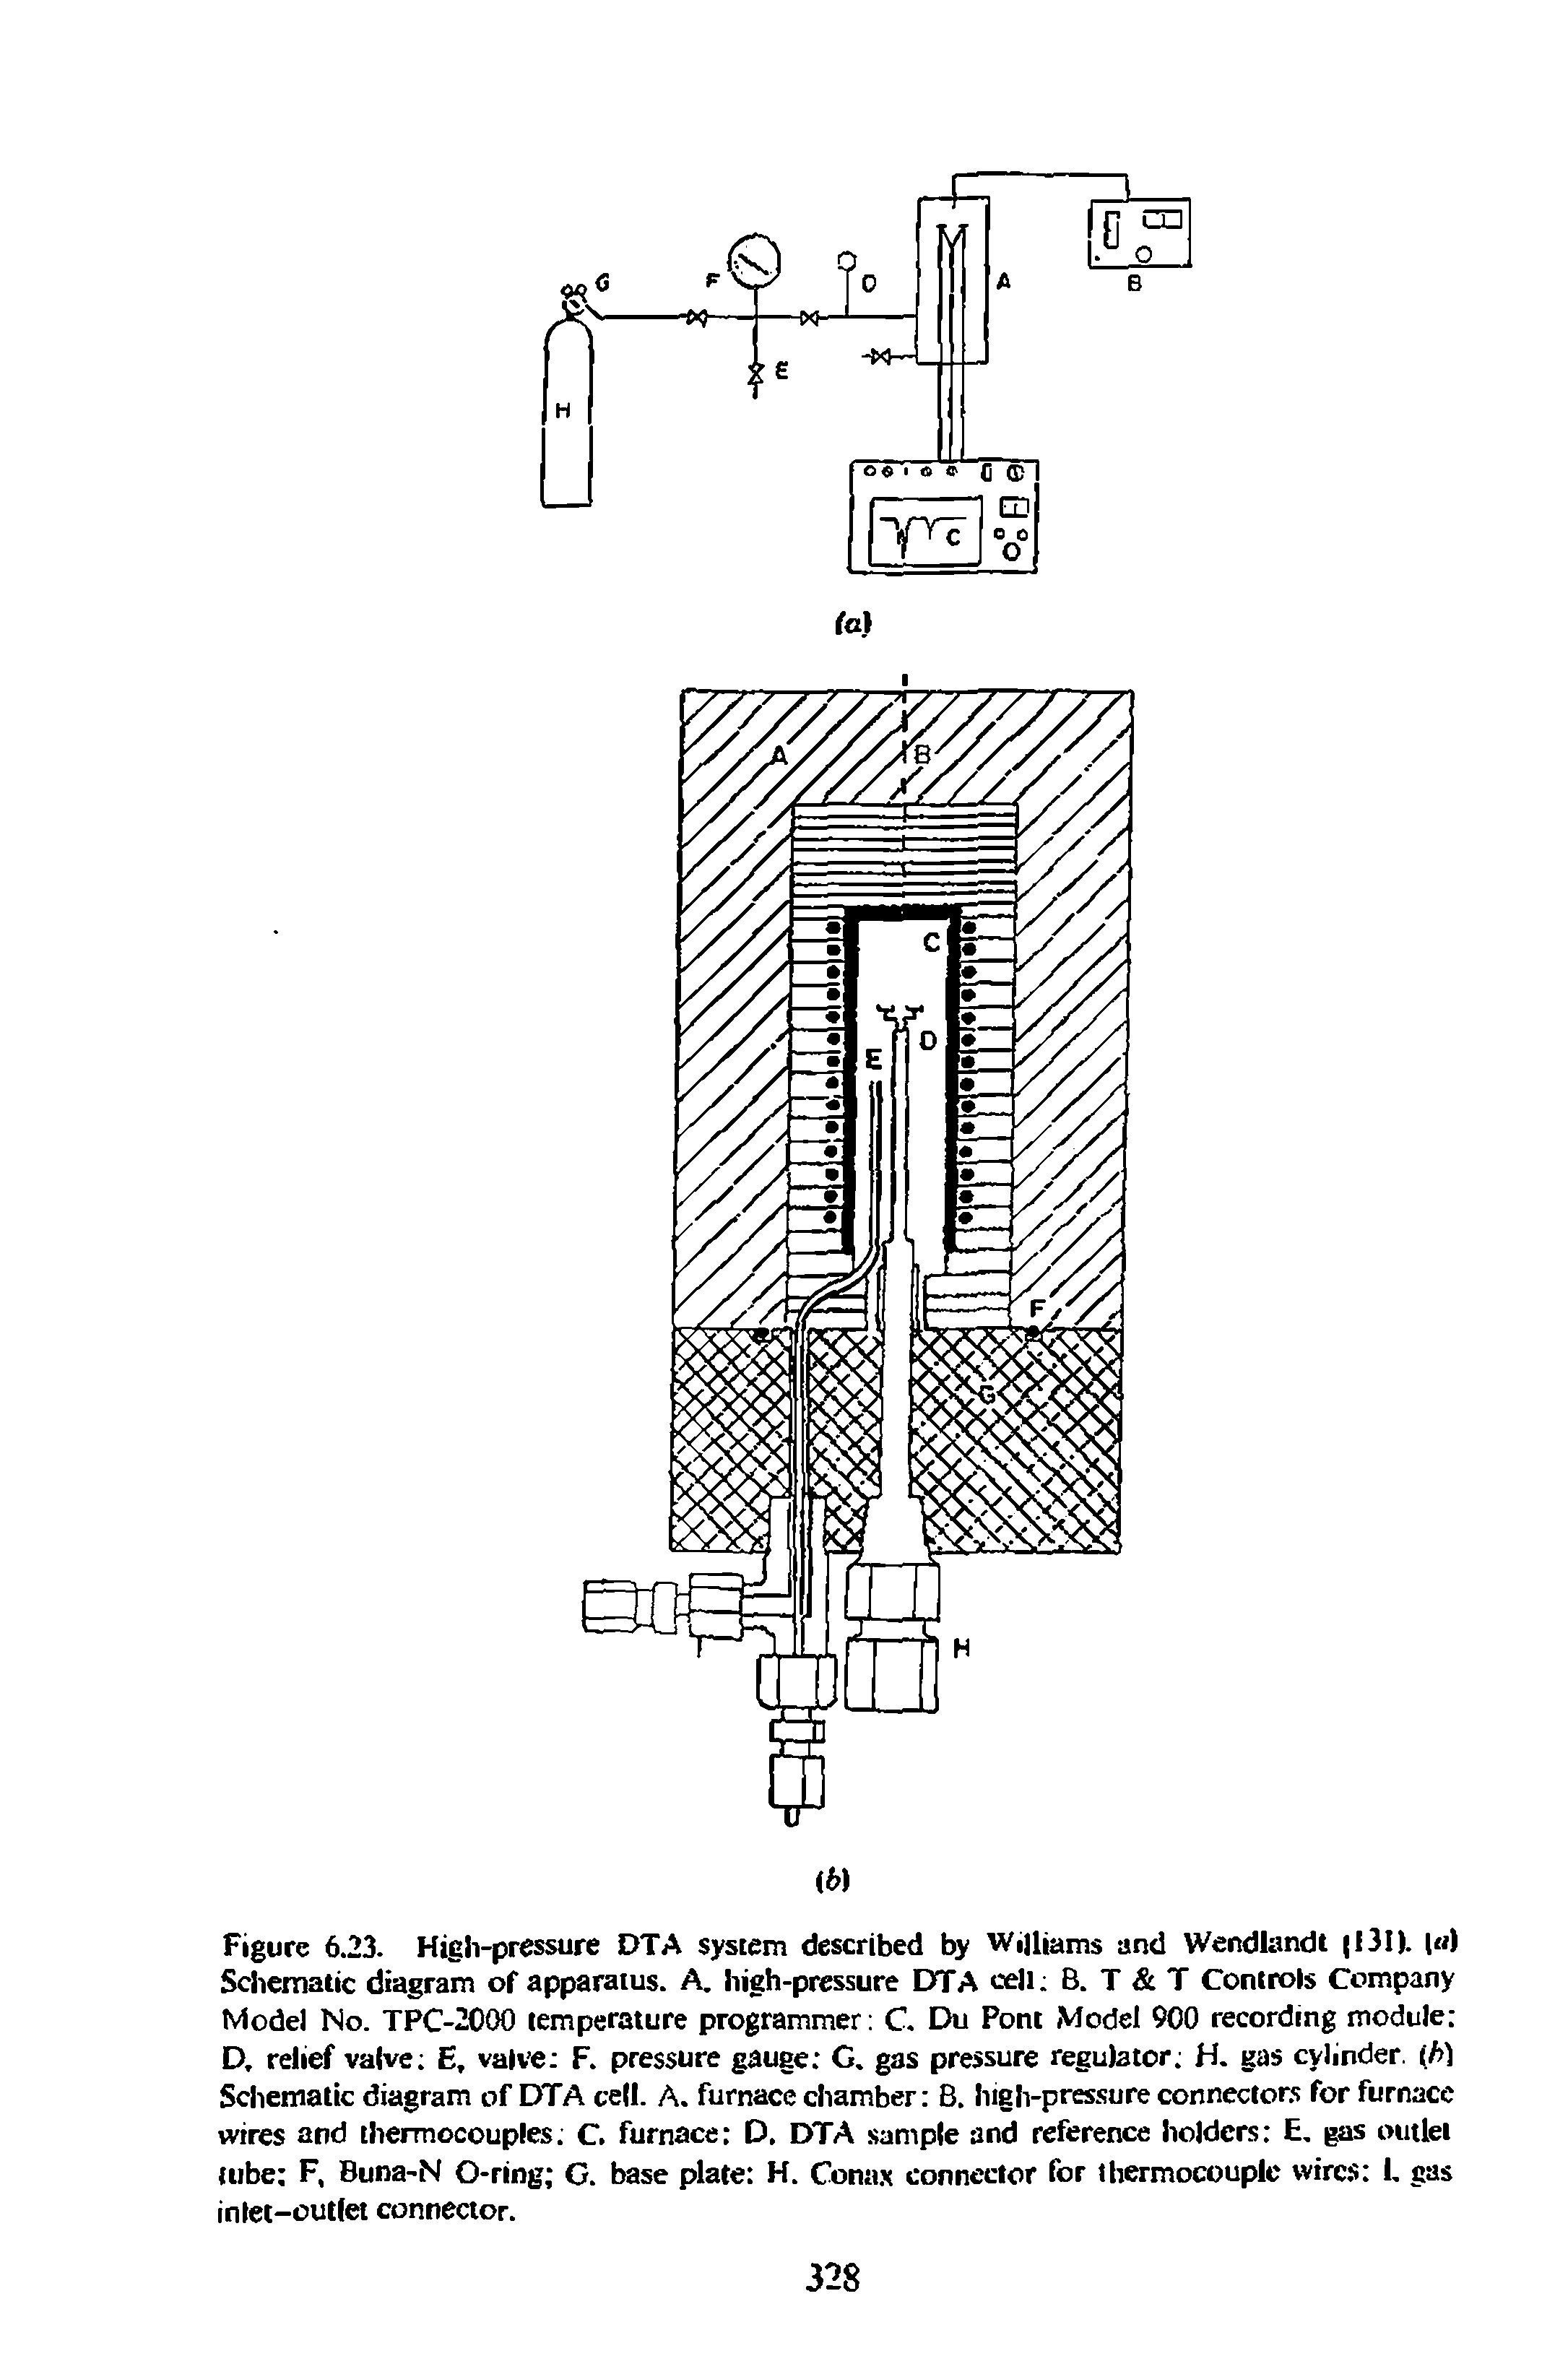 Figure 6.23. High-pressure DTA system described by Williams and Wendlandt (131. l ) Schematic diagram of apparatus. A. high-pressure DTA cell B. T T Controls Company Model No. TPC-2000 temperature programmer C Du Pont Model 900 recording module D, relief valve E, valve F. pressure gauge G. gas pressure regulator H. gas cylinder, b) Schematic diagram of DTA cell. A. furnace chamber B. high-pressure connectors for furnace wires and thermocouples. C. furnace D. DTA sample and reference holders E. gas outlet tube F, Buna-N O-ring G. base plate H. Conax connector for thermocouple wires 1. gas inlet-outlet connector.